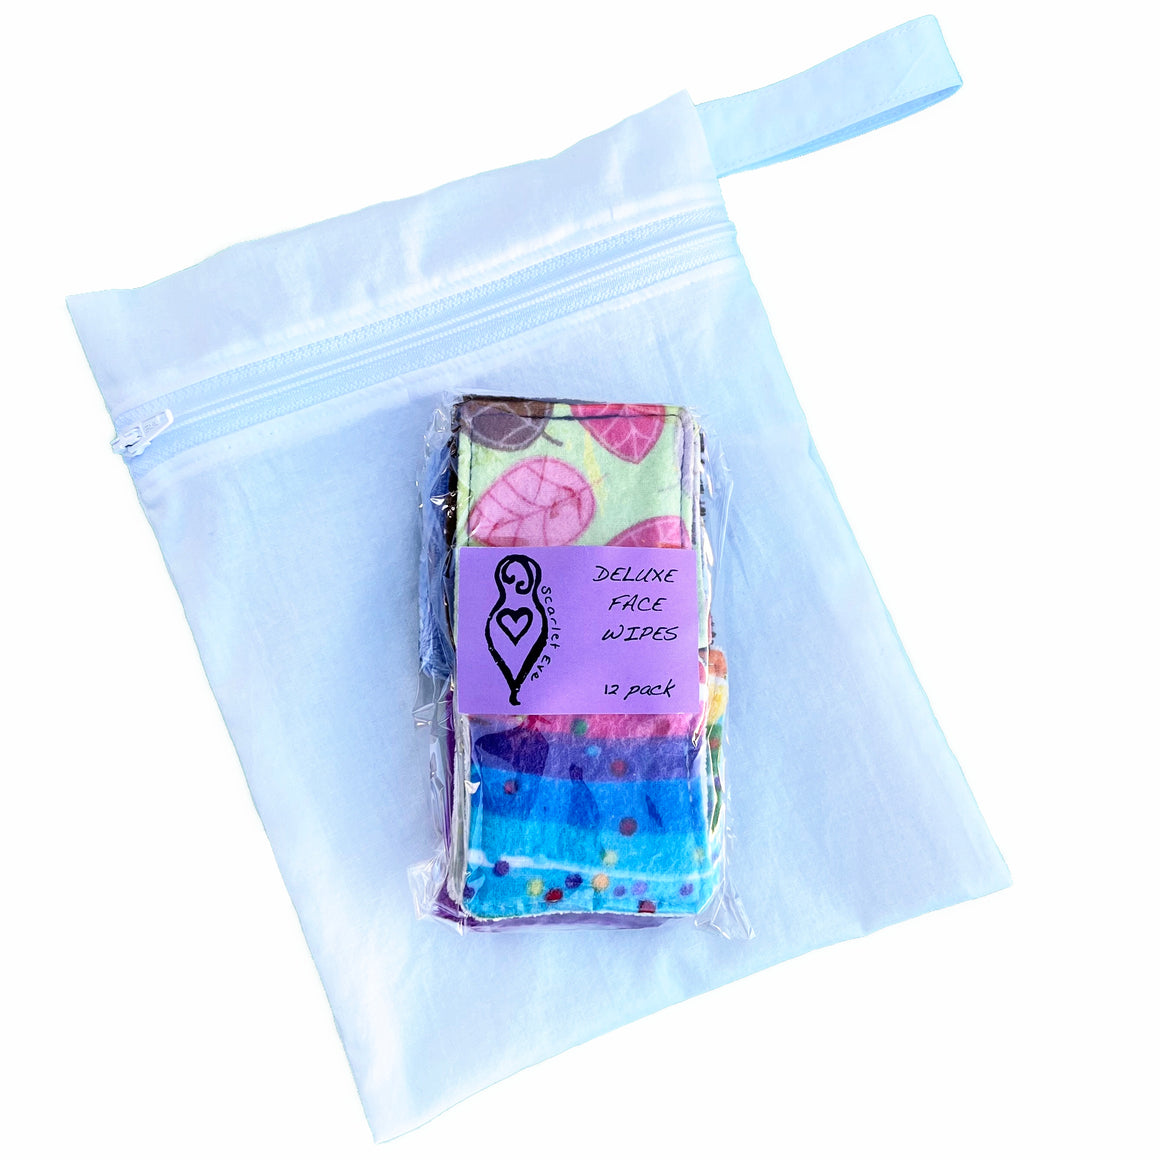 Scarlet Eve Deluxe Face Wipes Wash Bag Set. A pack of 12 Deluxe Face Wipes, packaged in home compostable clear cello bag, sitting on top of a white cotton wash bag.